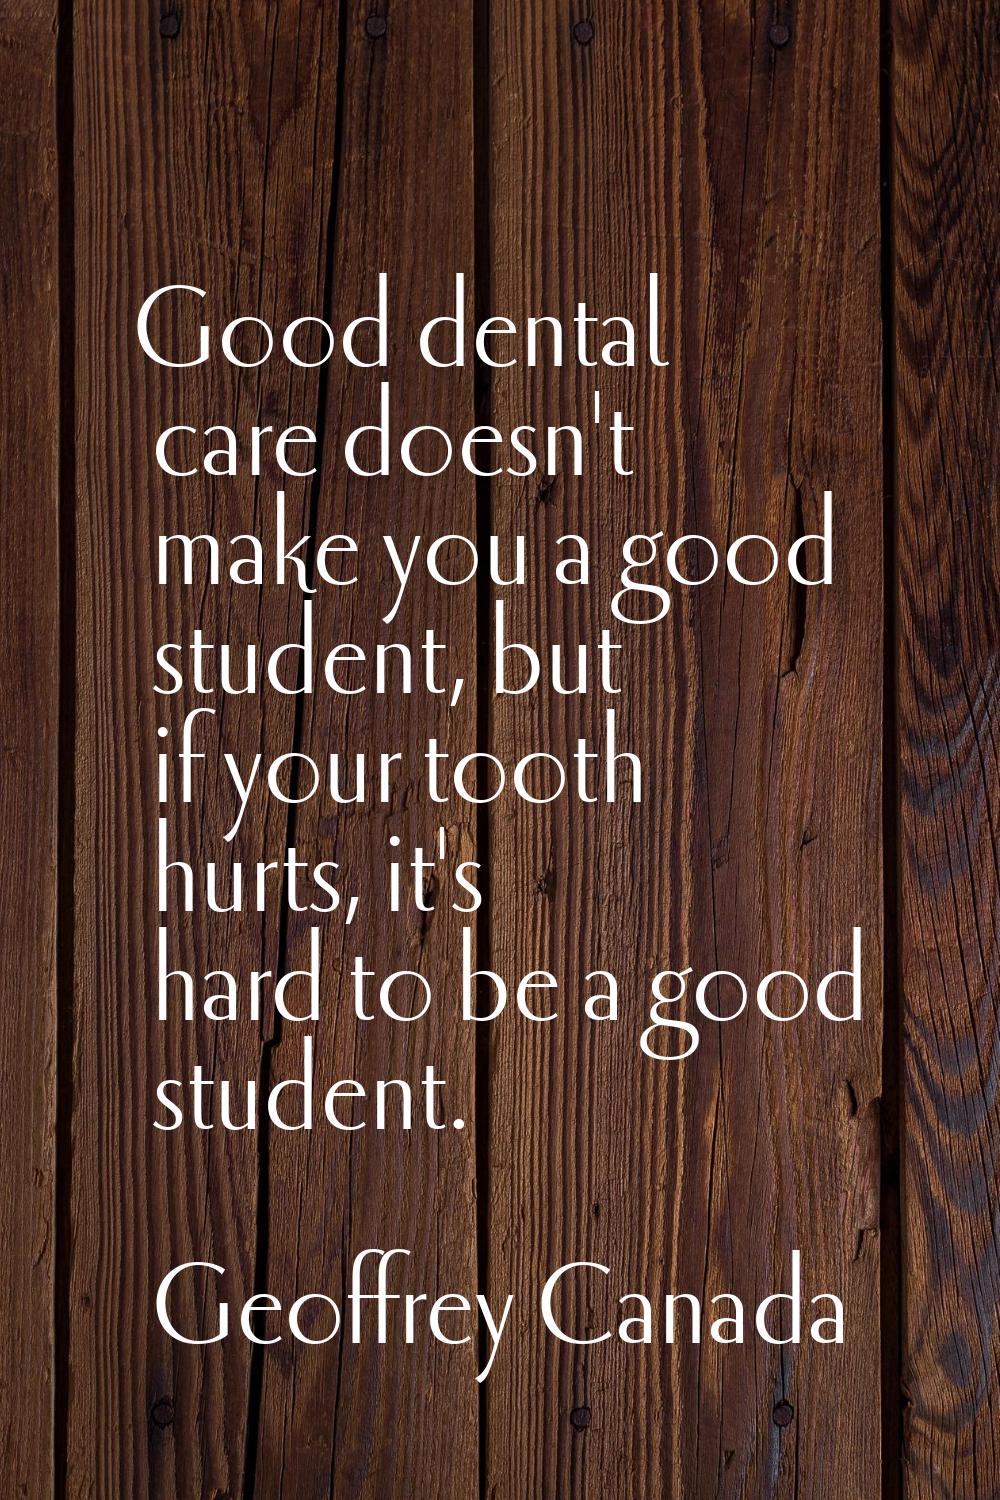 Good dental care doesn't make you a good student, but if your tooth hurts, it's hard to be a good s